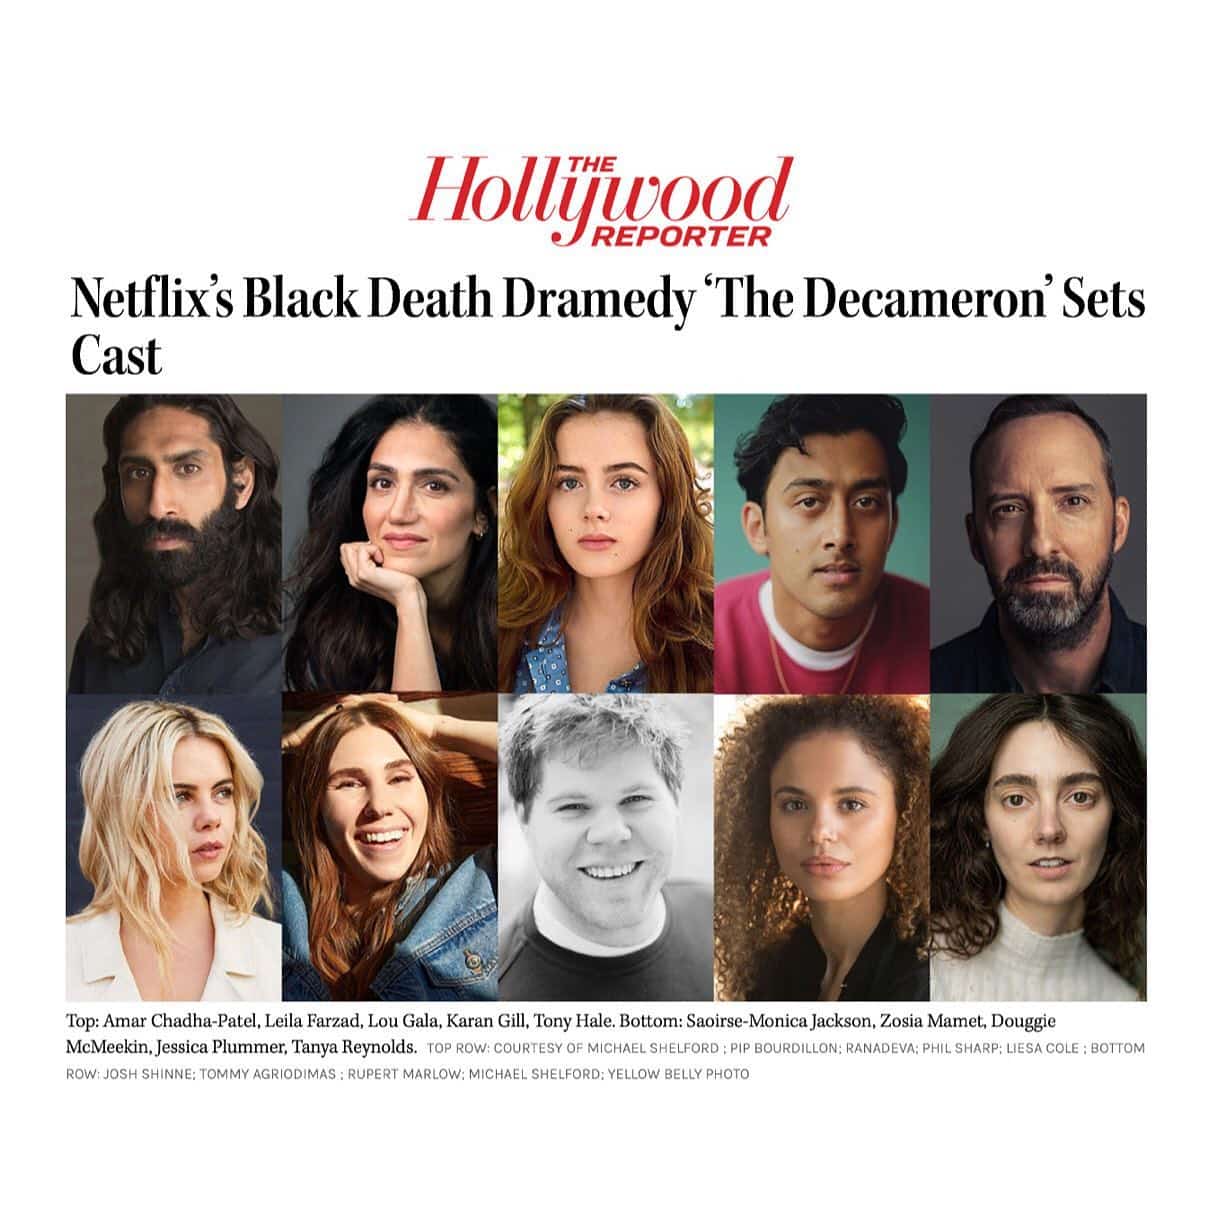 @amarchadhapatel, @jessicakate_plummer  and @tanyaloureynolds have been cast in The Decameron - a Netflix dramedy 
.
.
.